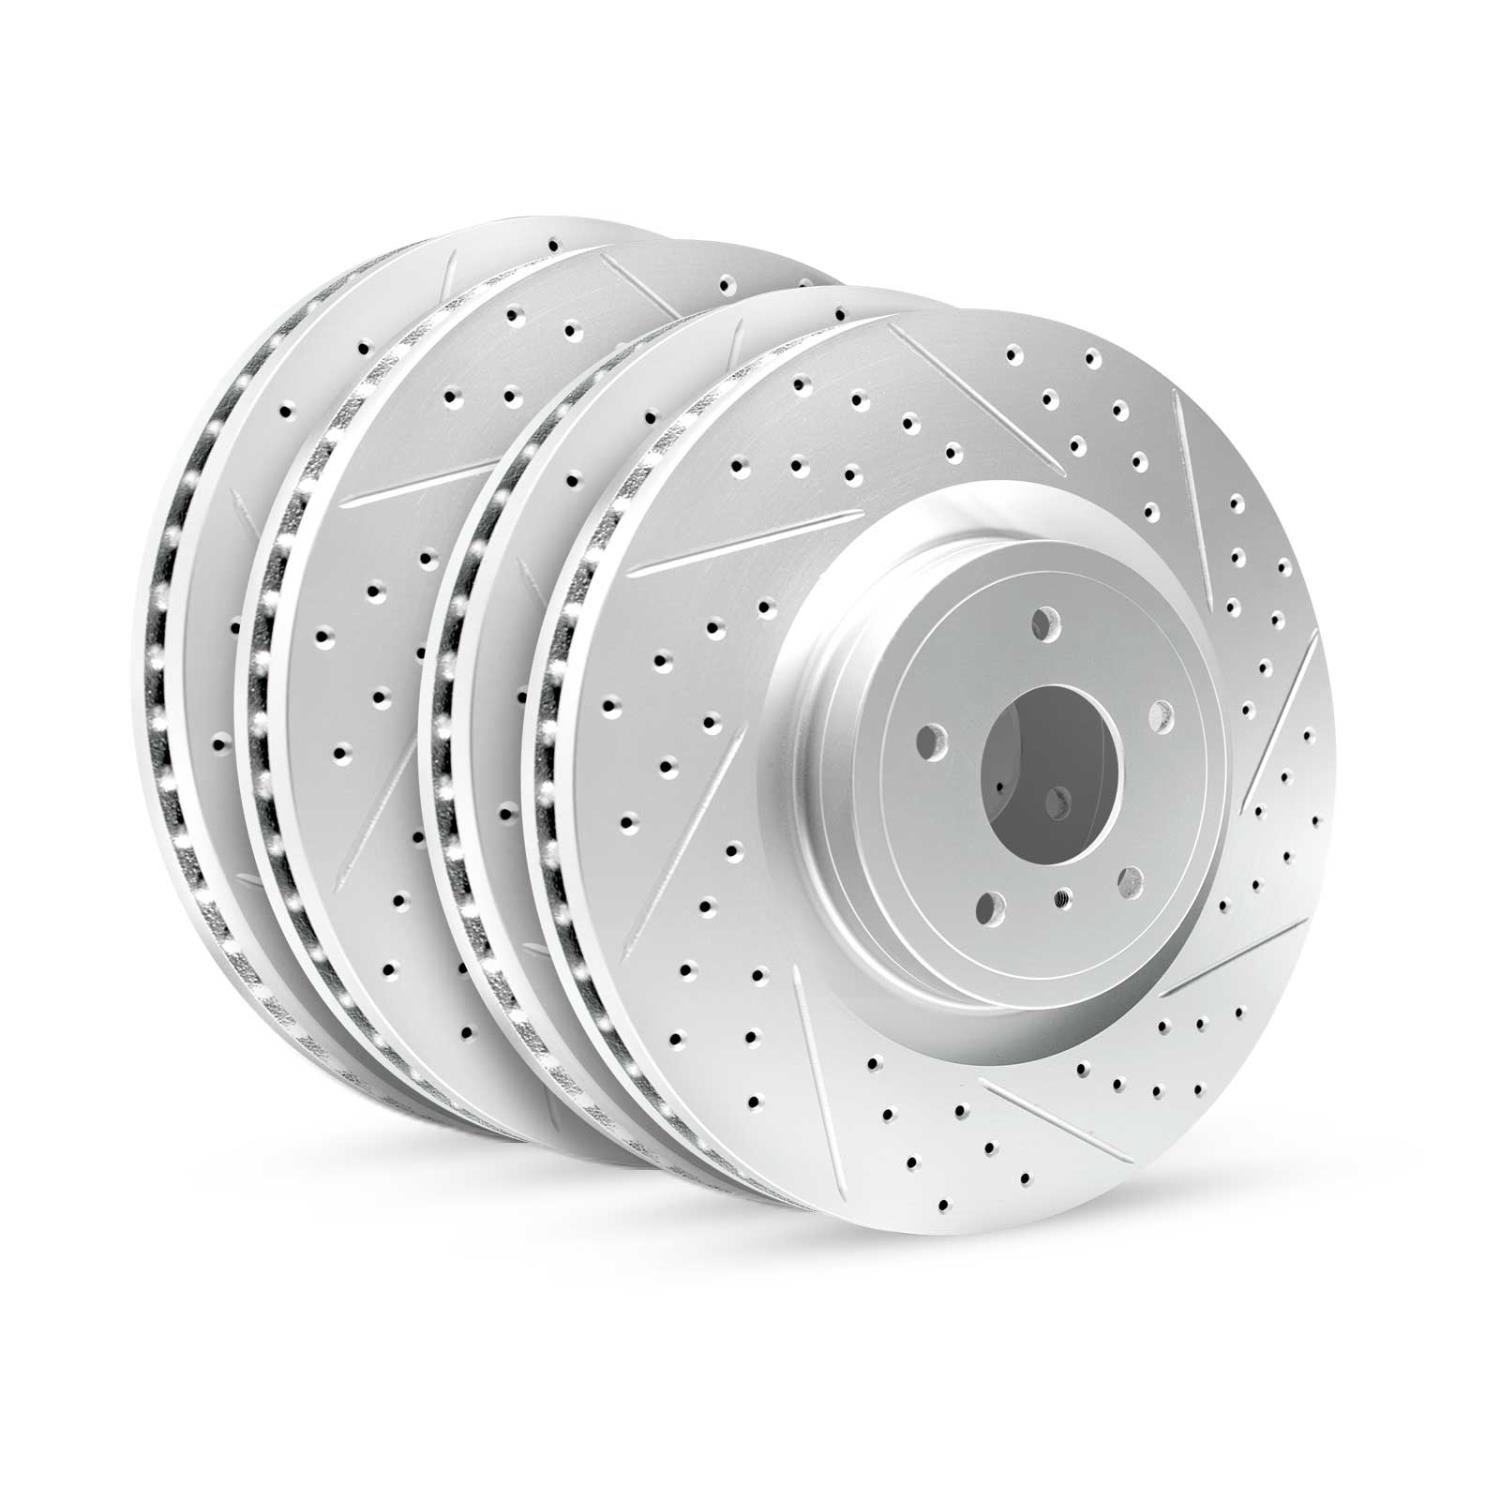 GEO-Carbon Drilled/Slotted Rotors, 2004-2007 Ford/Mazda,